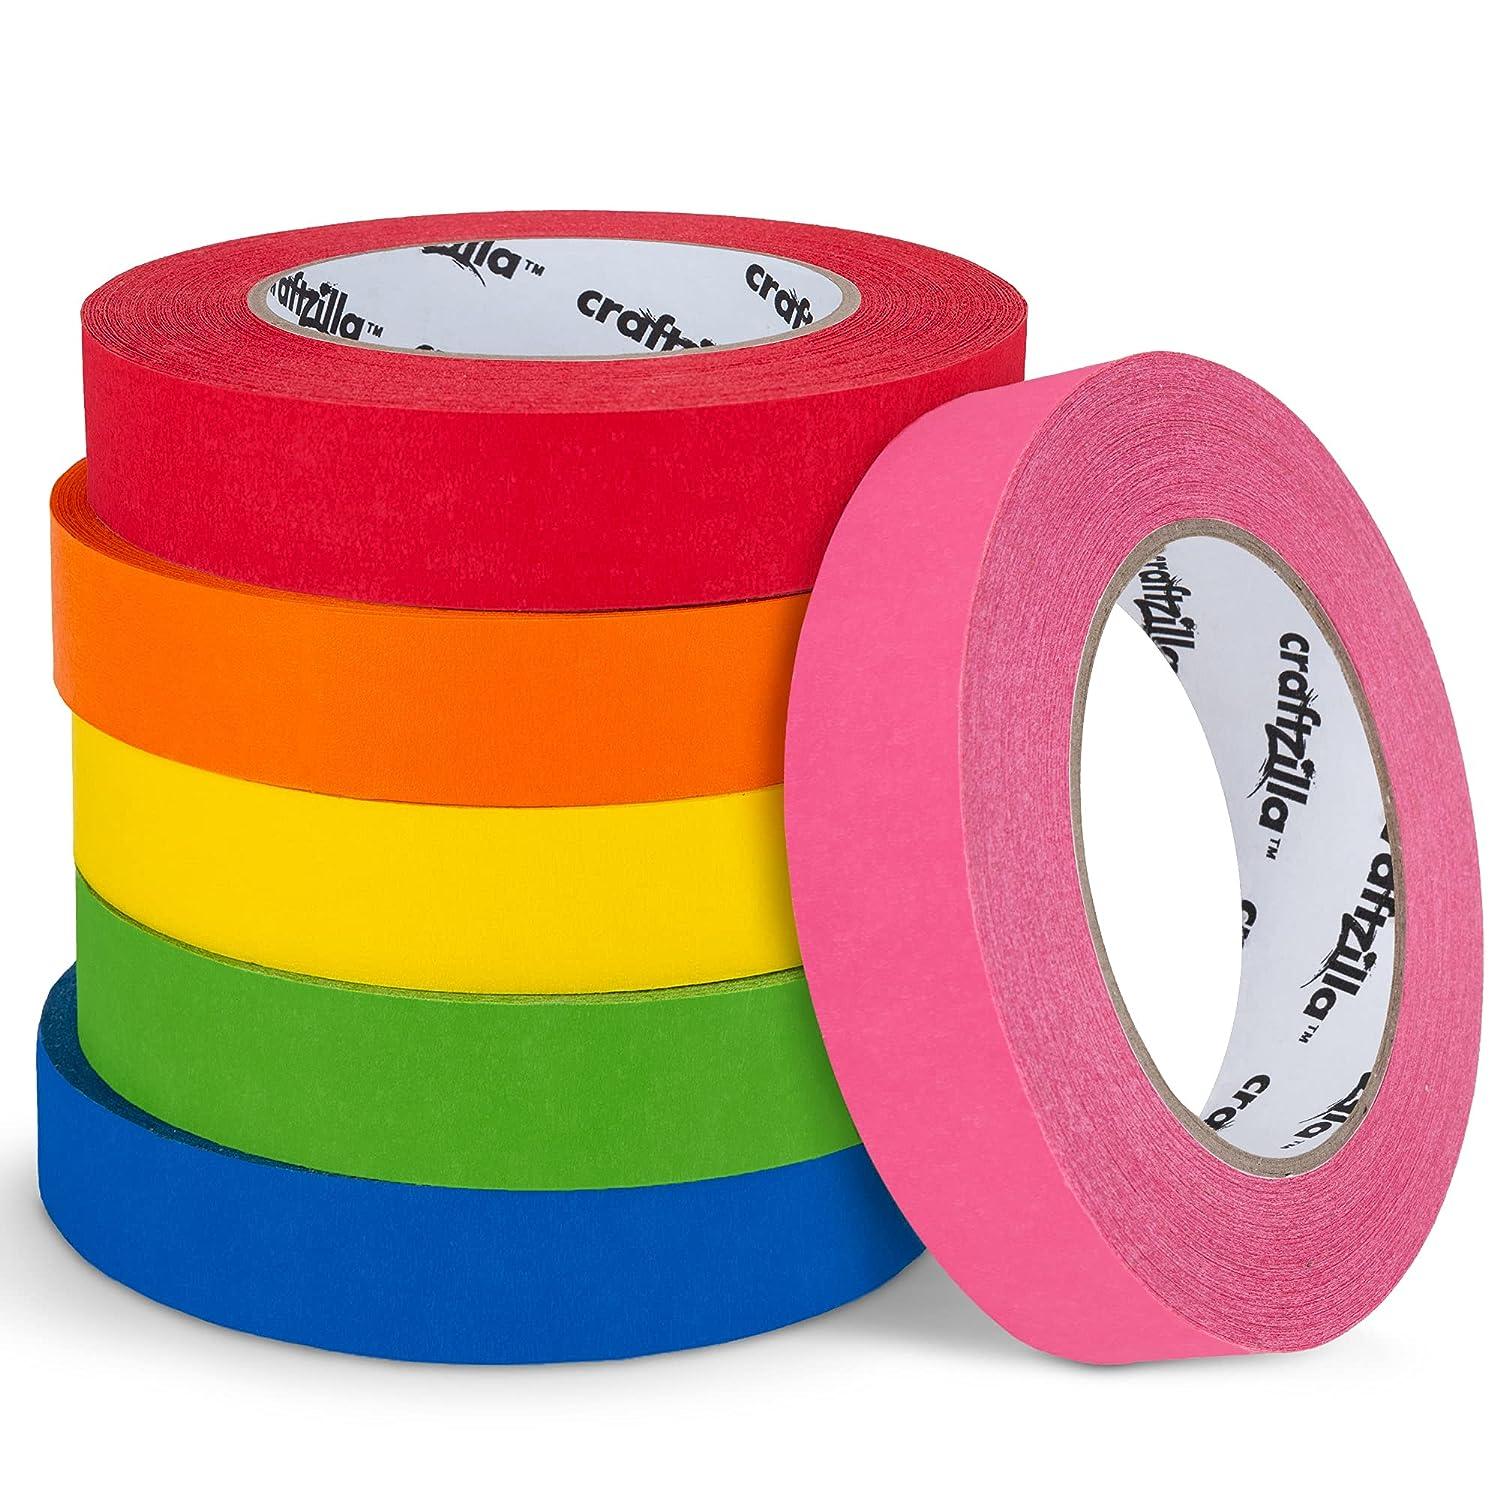 Craftzilla Colored Masking Tape - 11 Rolls, 55 yd x 1 in Each Tape - 1,815  Feet x 1 Inch of Colorful Craft Tape - Vibrant Rainbow Color Teacher Tape –